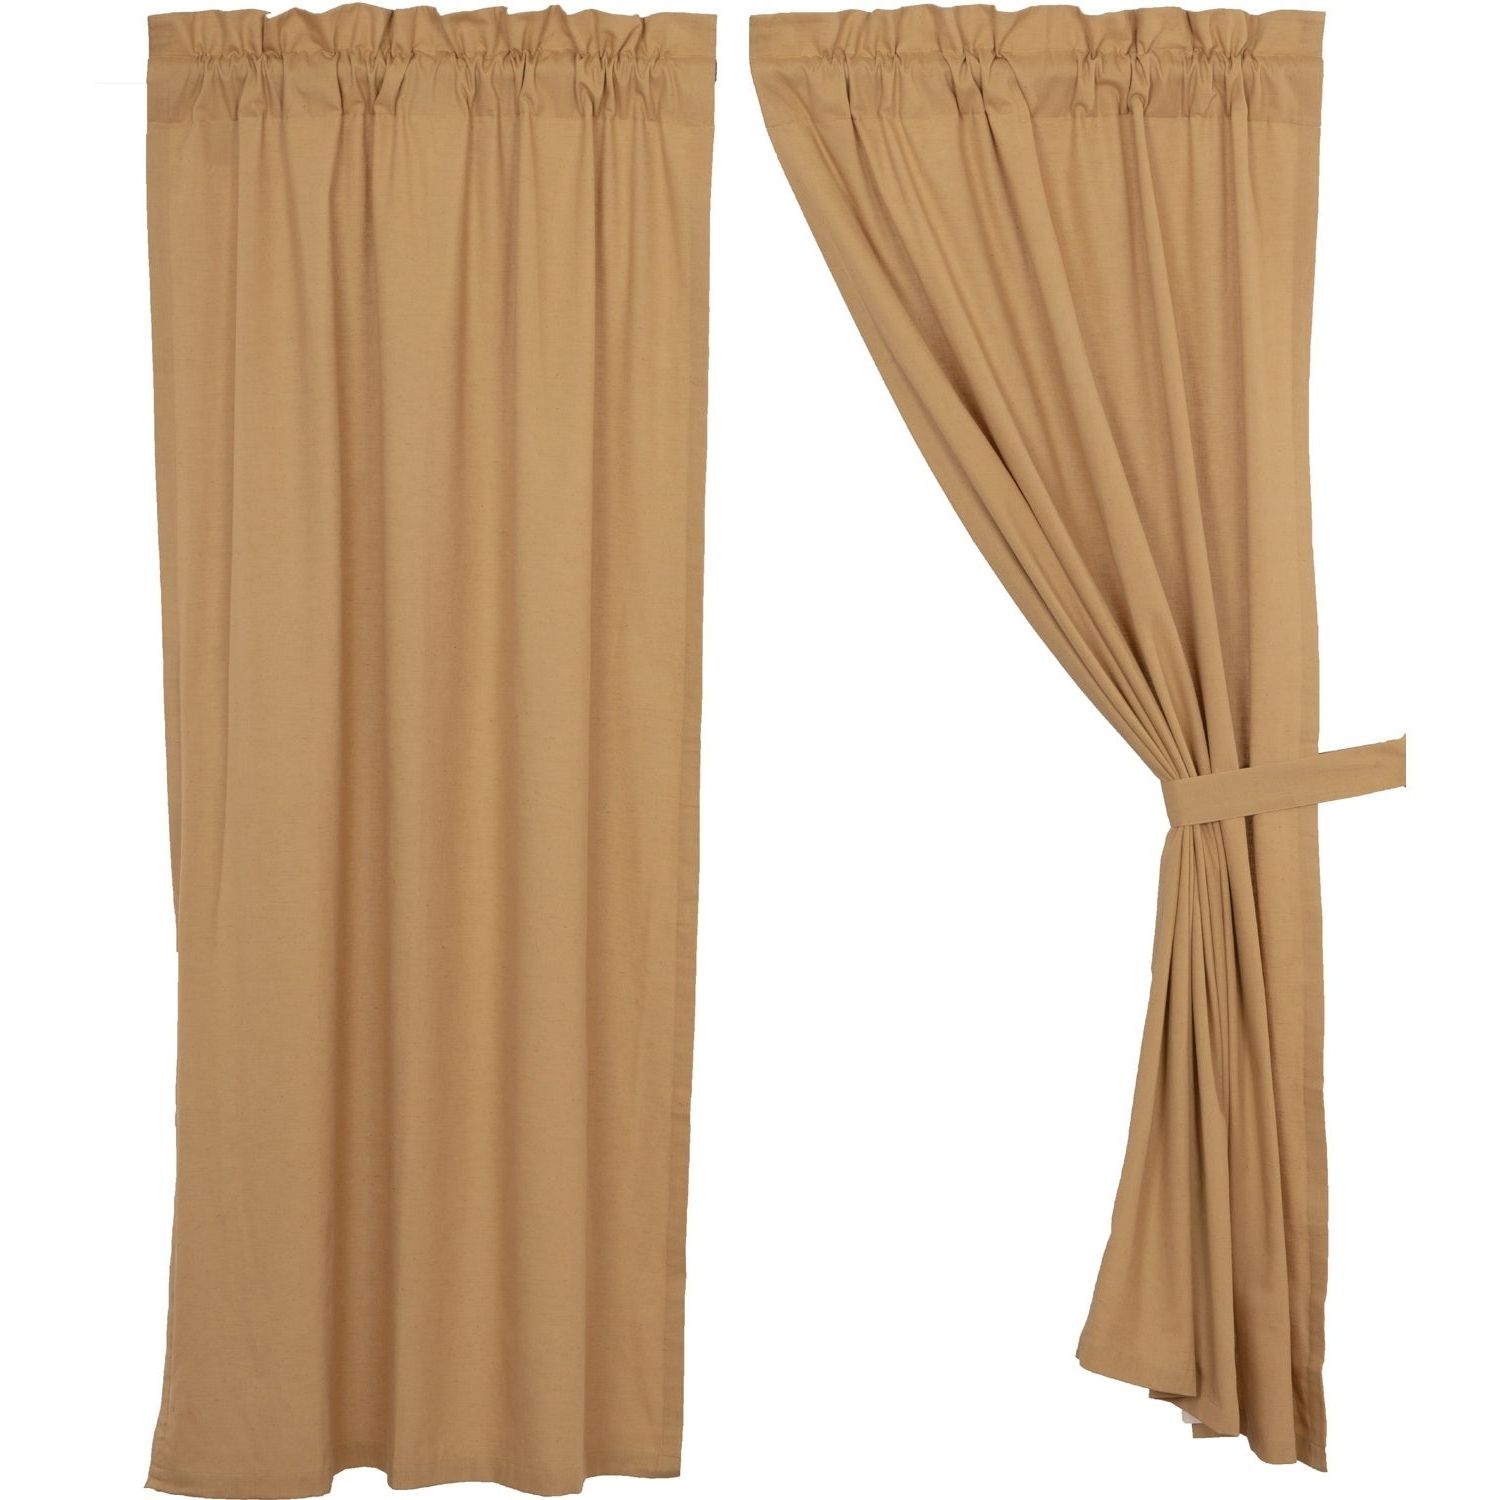 2021 Simple Life Flax Tier Pairs Intended For Details About Farmhouse Curtains Vhc Simple Life Flax Panel Pair Rod (View 13 of 20)